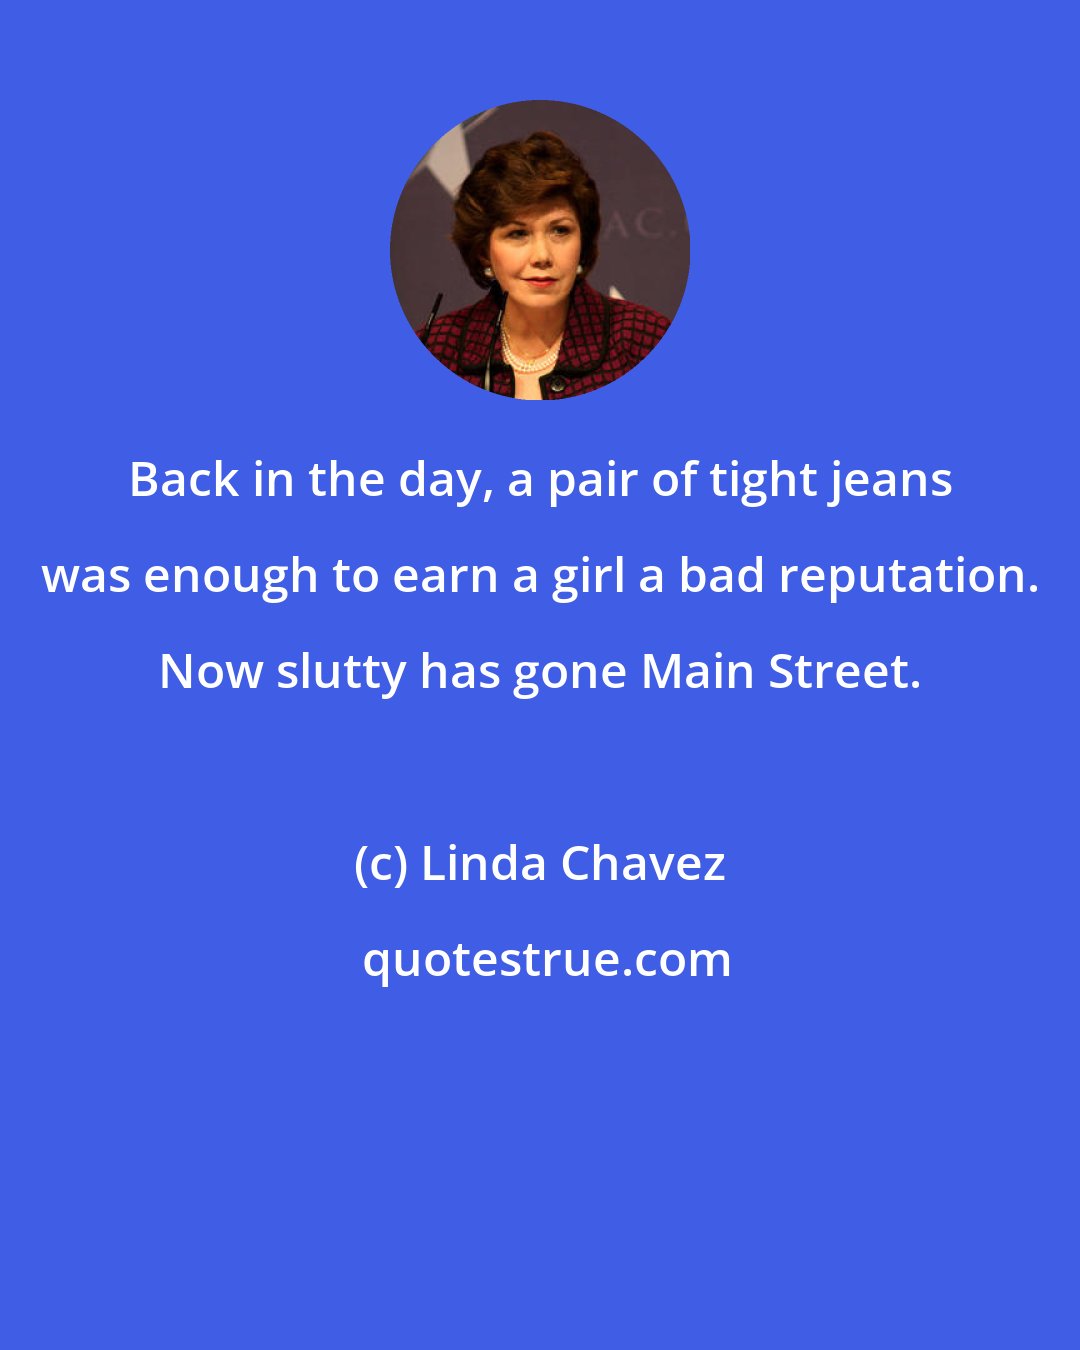 Linda Chavez: Back in the day, a pair of tight jeans was enough to earn a girl a bad reputation. Now slutty has gone Main Street.